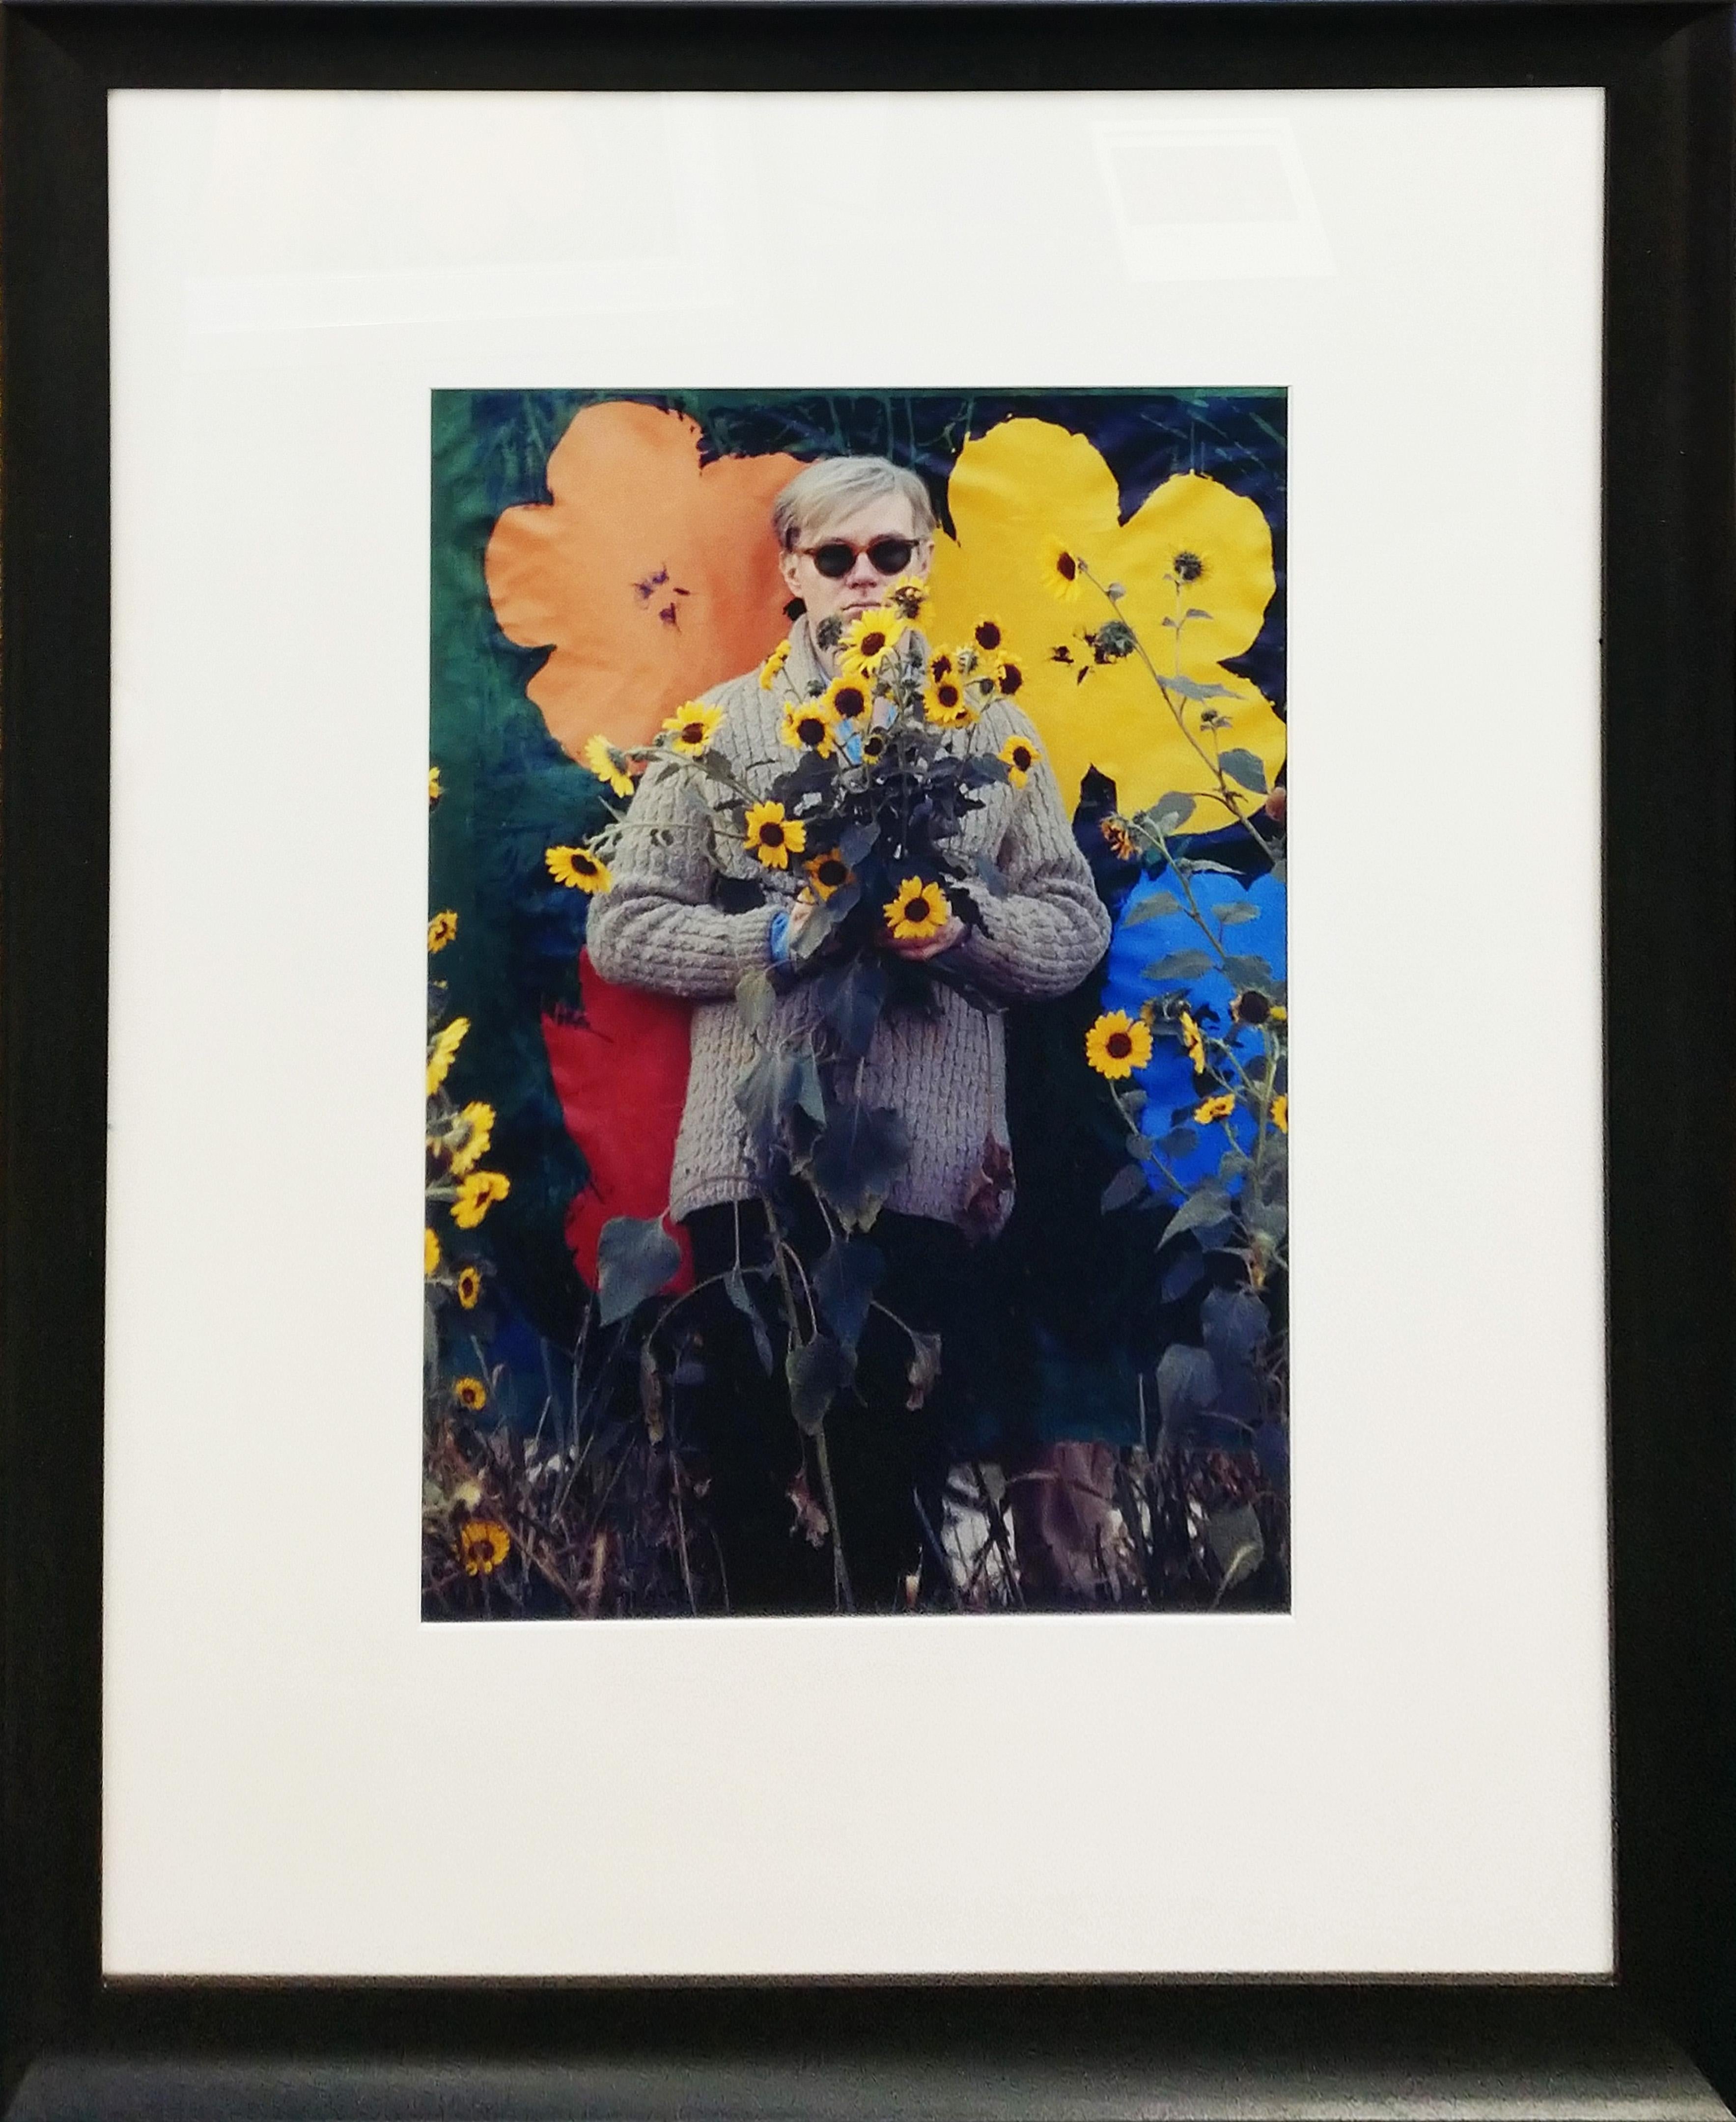 William John Kennedy Color Photograph - ANDY WARHOL, FIELD OF FLOWERS, 1964, QUEENS, NEW YORK